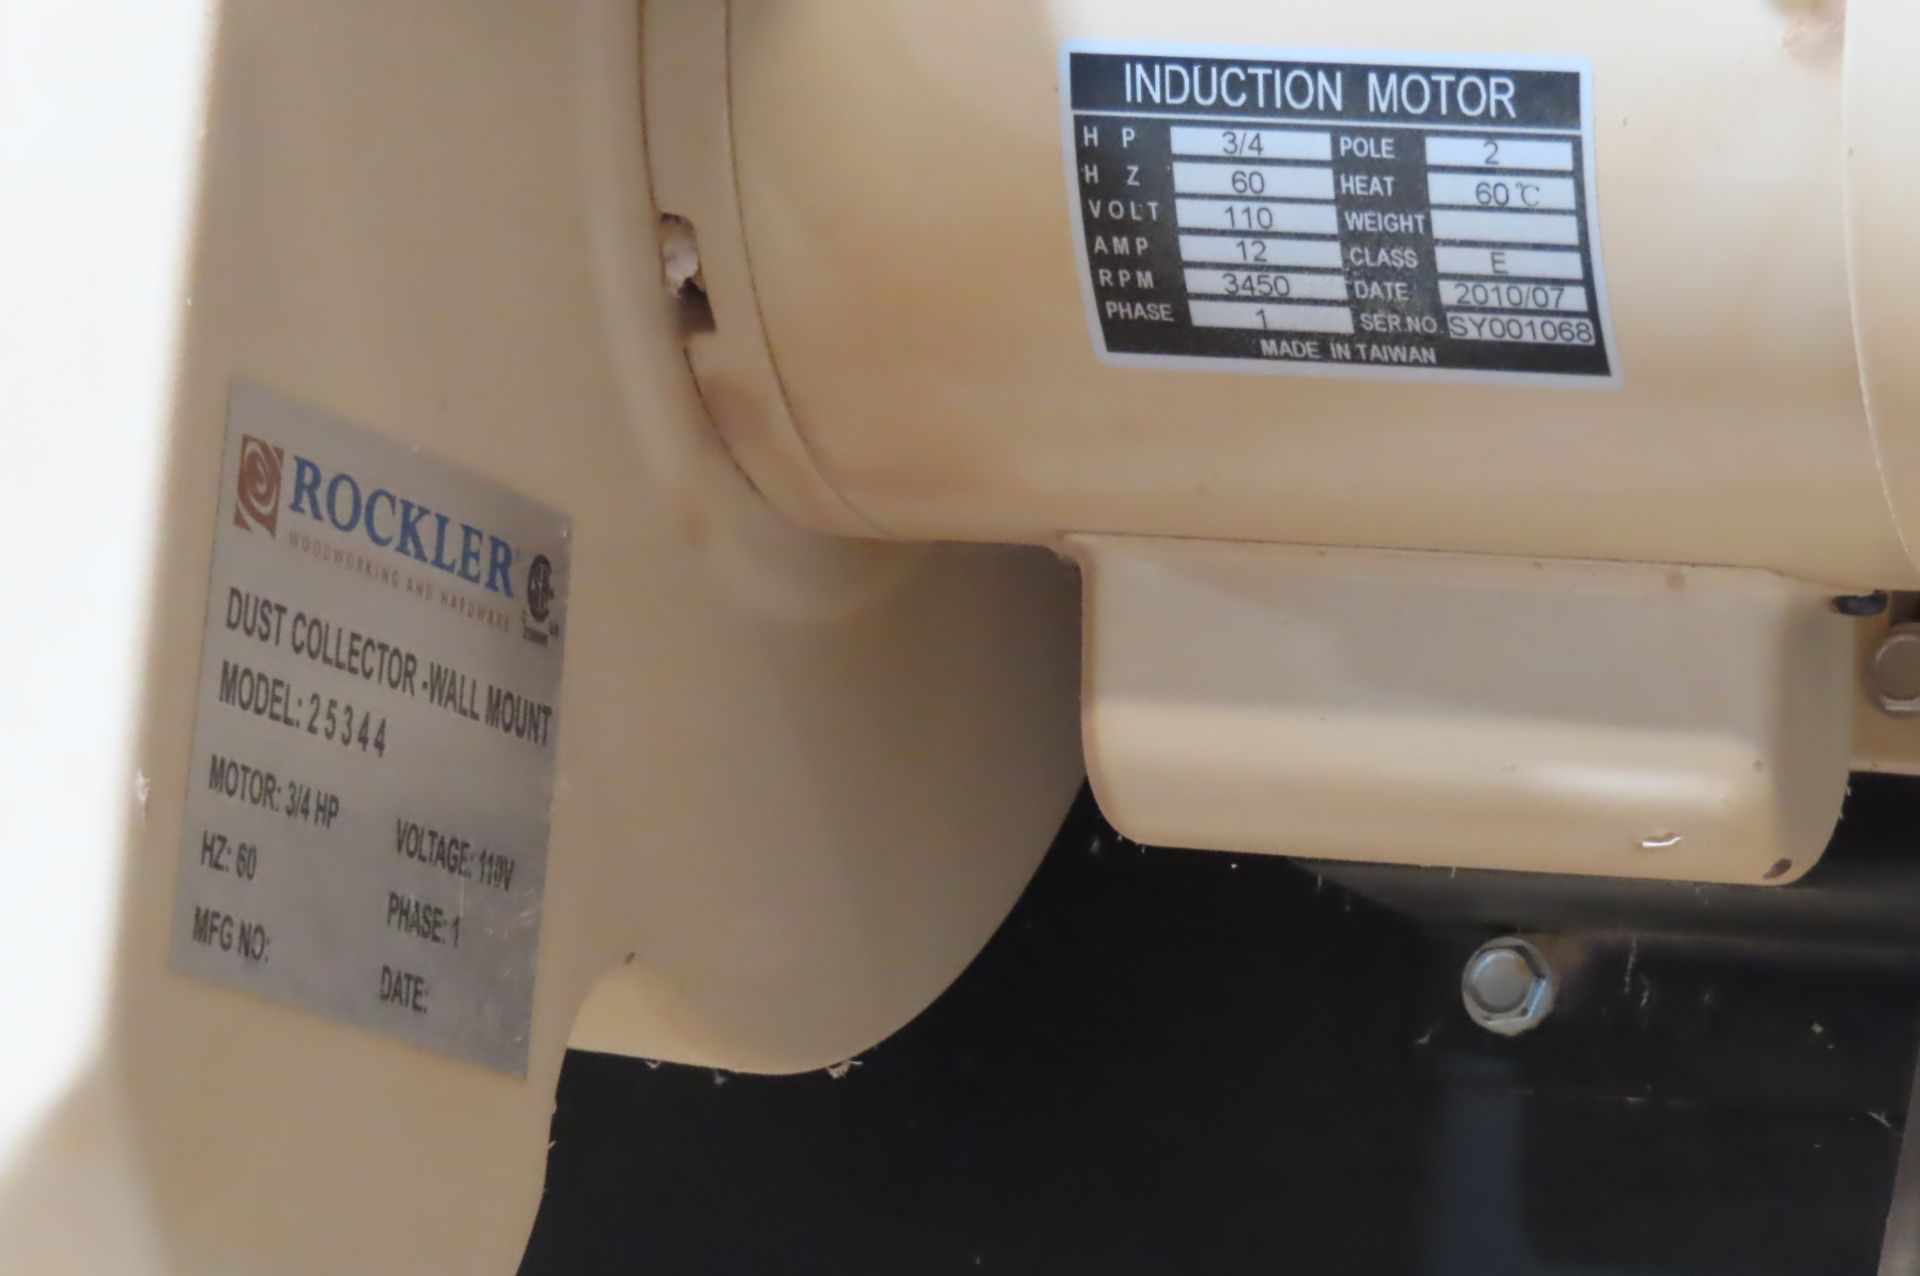 ROCKLER 25344 WALL HANGING DUST COLLECTOR, 3/4 HP - Image 2 of 3